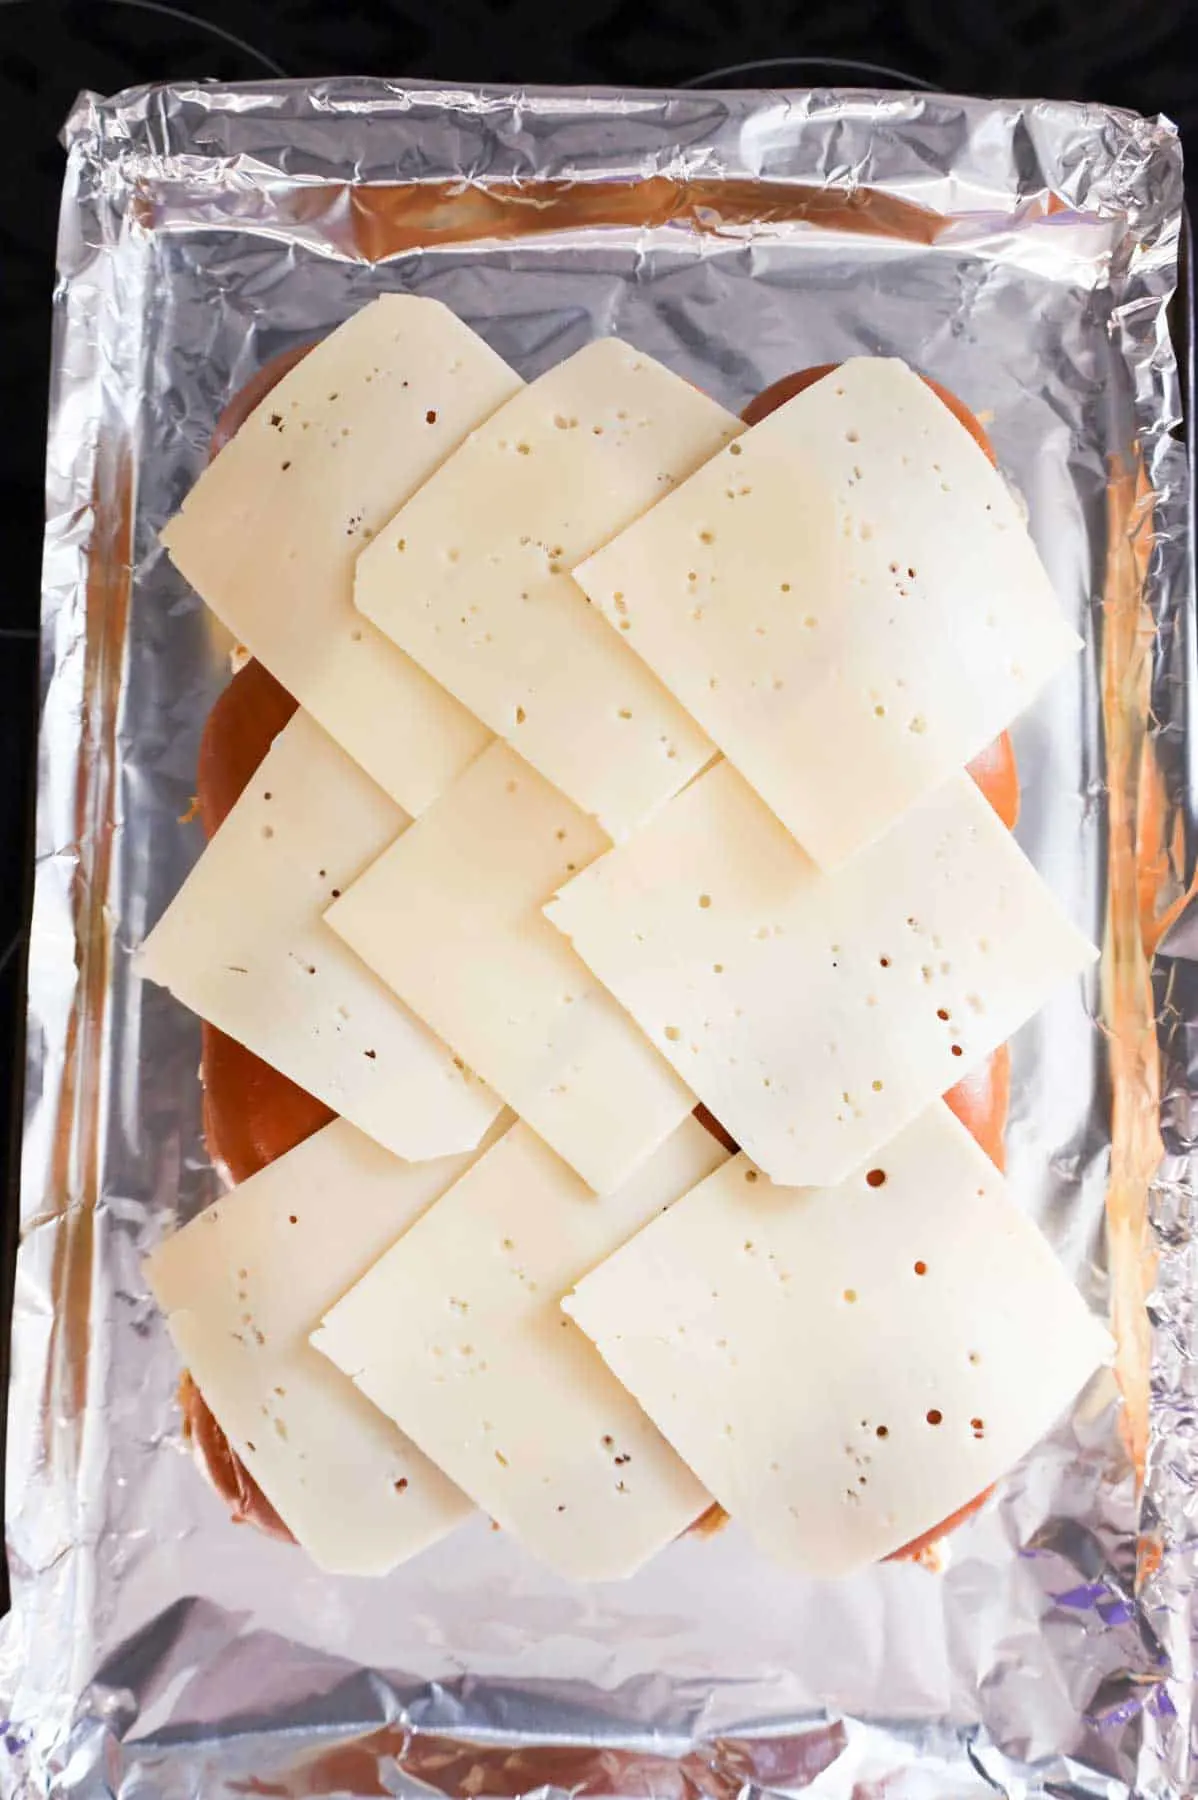 Swiss cheese slices on dinner rolls on a baking sheet